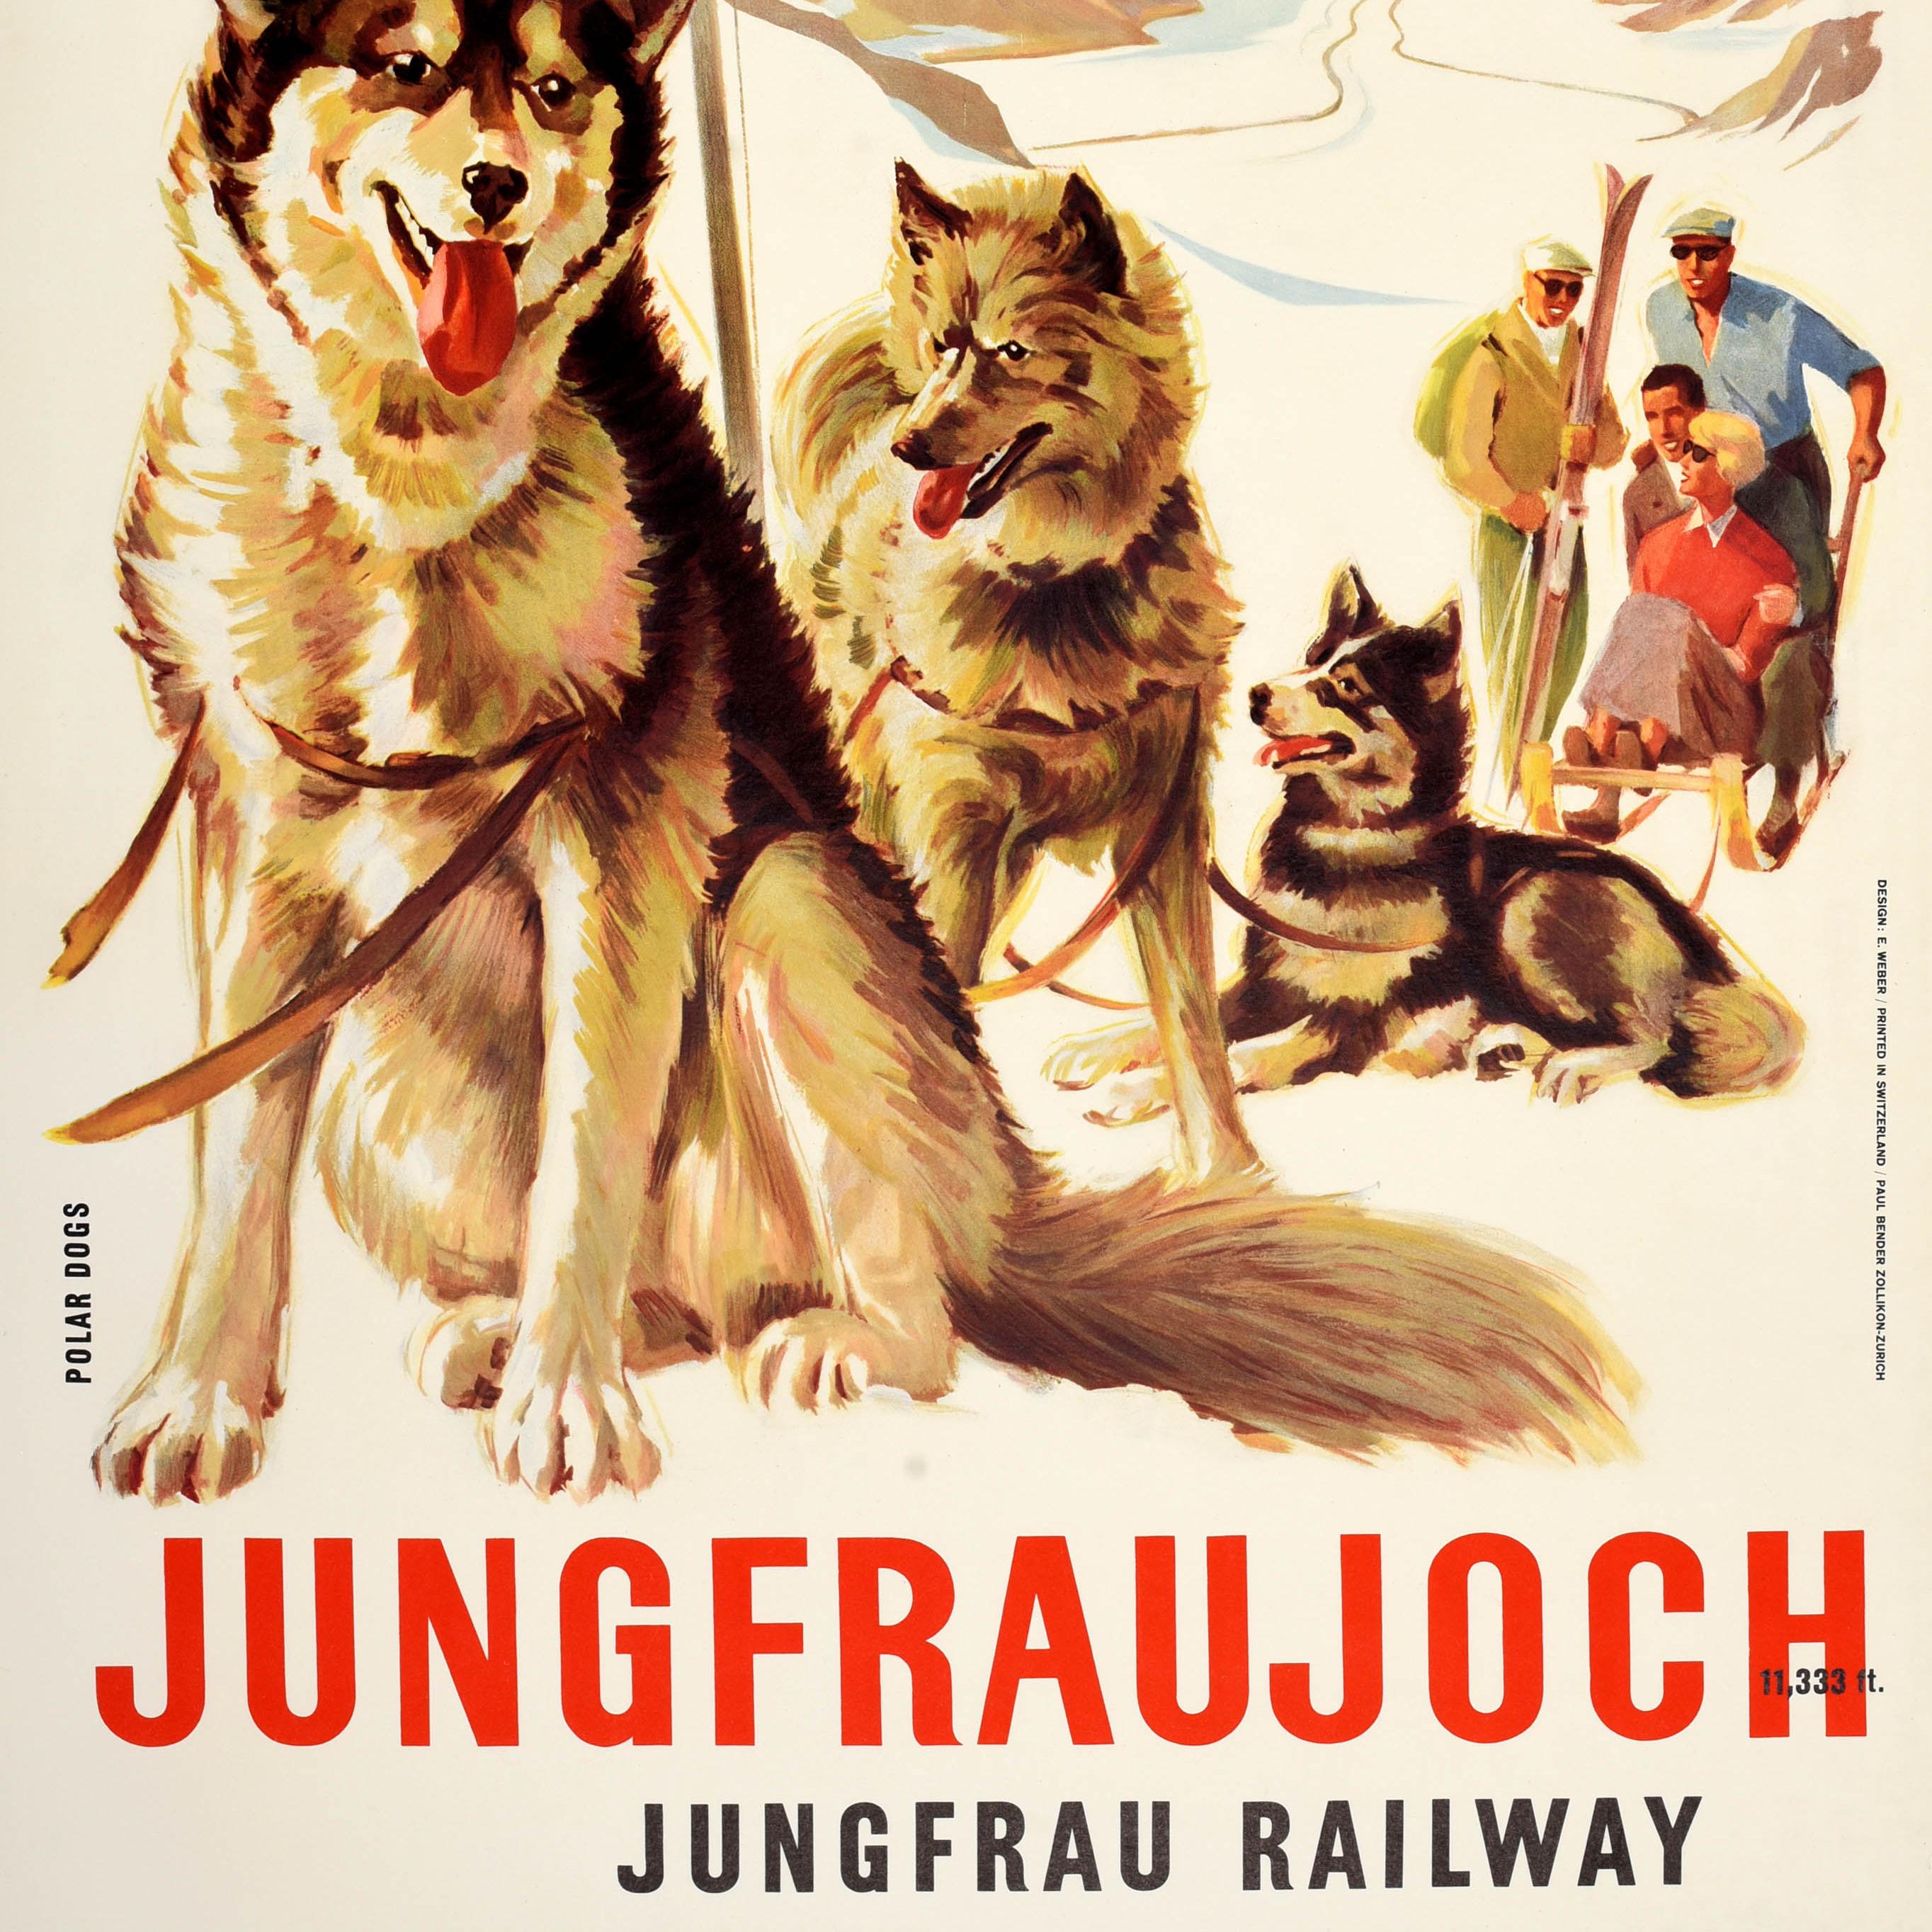 Original vintage winter sport and skiing travel poster - Bernese Oberland Switzerland Jungfraujoch Jungfrau Railway - great artwork titled Polar Dogs featuring huskies harnessed to a sled with a lady and man sitting on the sledge preparing to ride